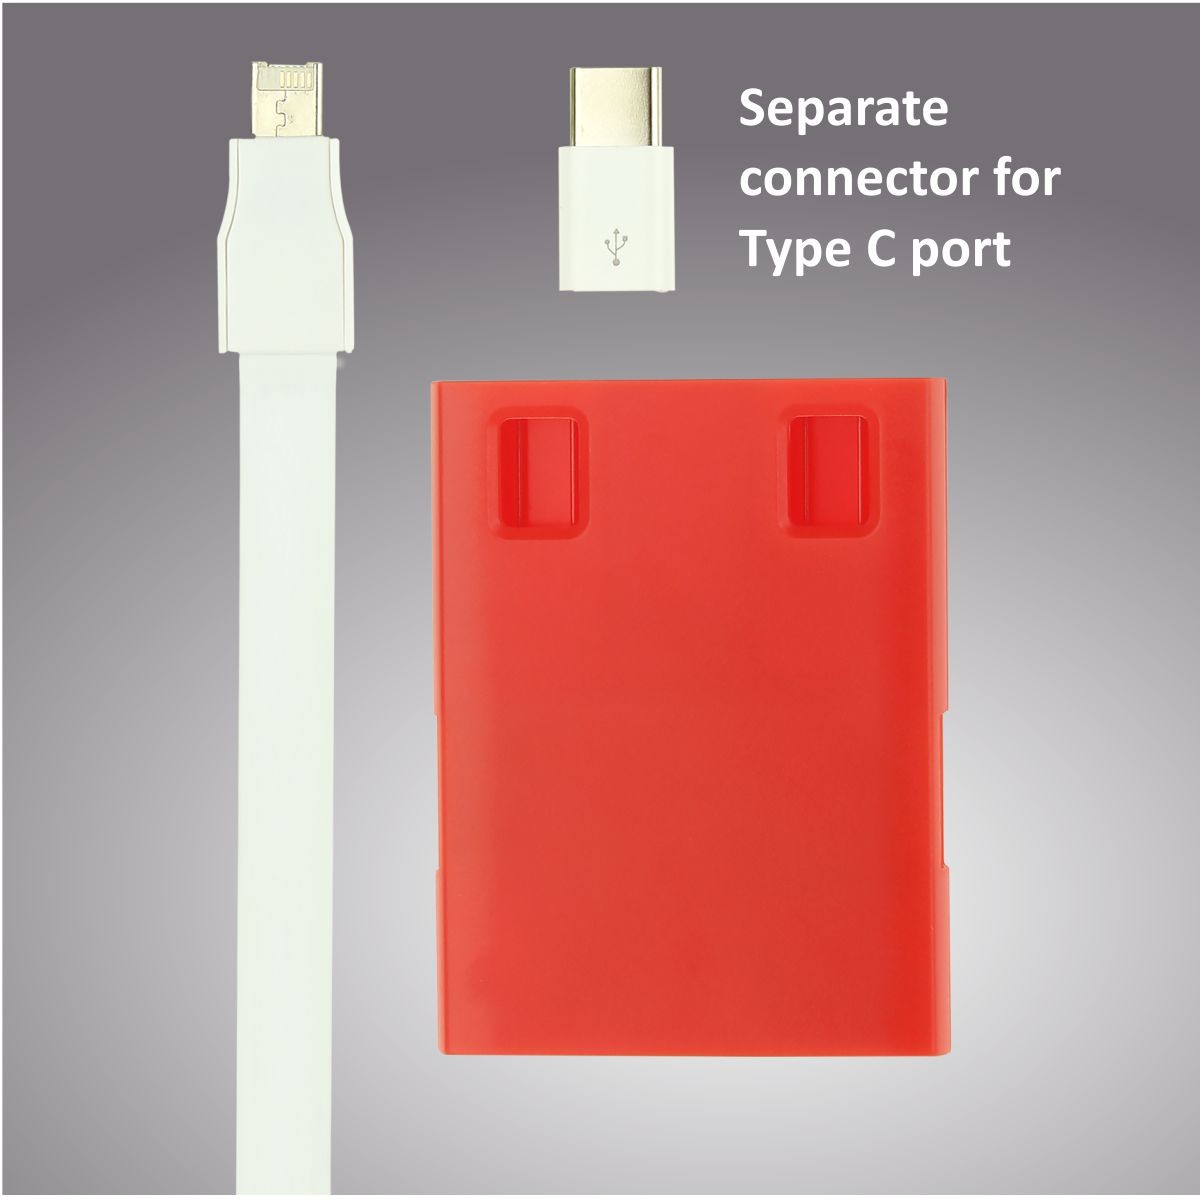 3 Port USB Hub Extension Cable - for Promotions, Giveaway, Event Freebies, Corporate, and Personal Gifting BGC101